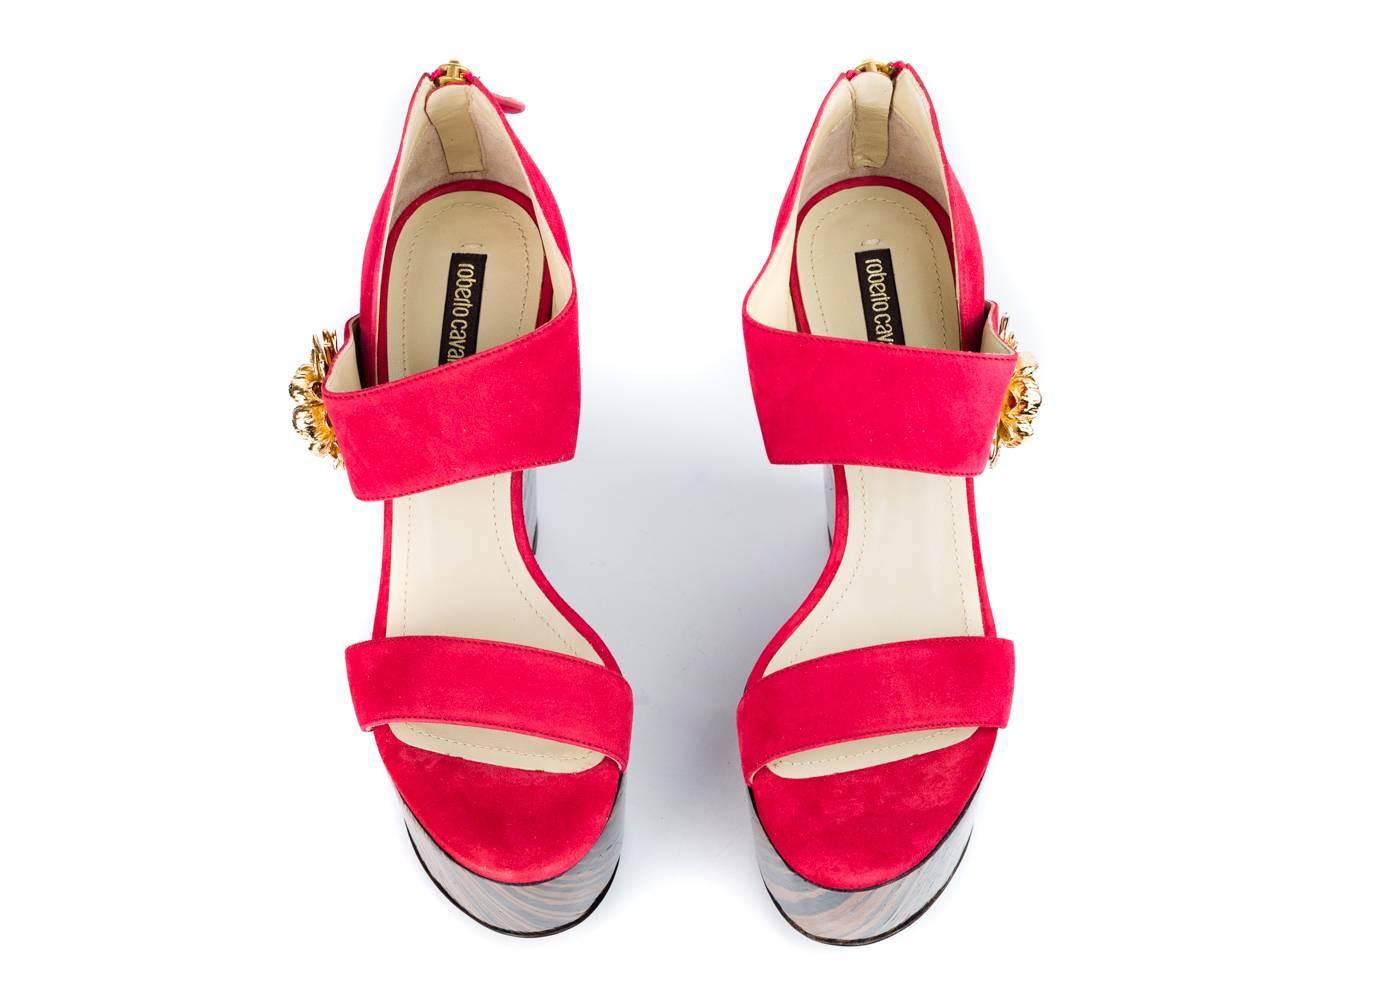 Brand New Roberto Cavalli Wedges
Original Box and Dust Bag Included
Retails in Stores and Online for $1295
Size IT 39 / US 9 Fits True to Size

These unique sandal wedges with a gorgeous bold red color suede will make a statement no matter where you